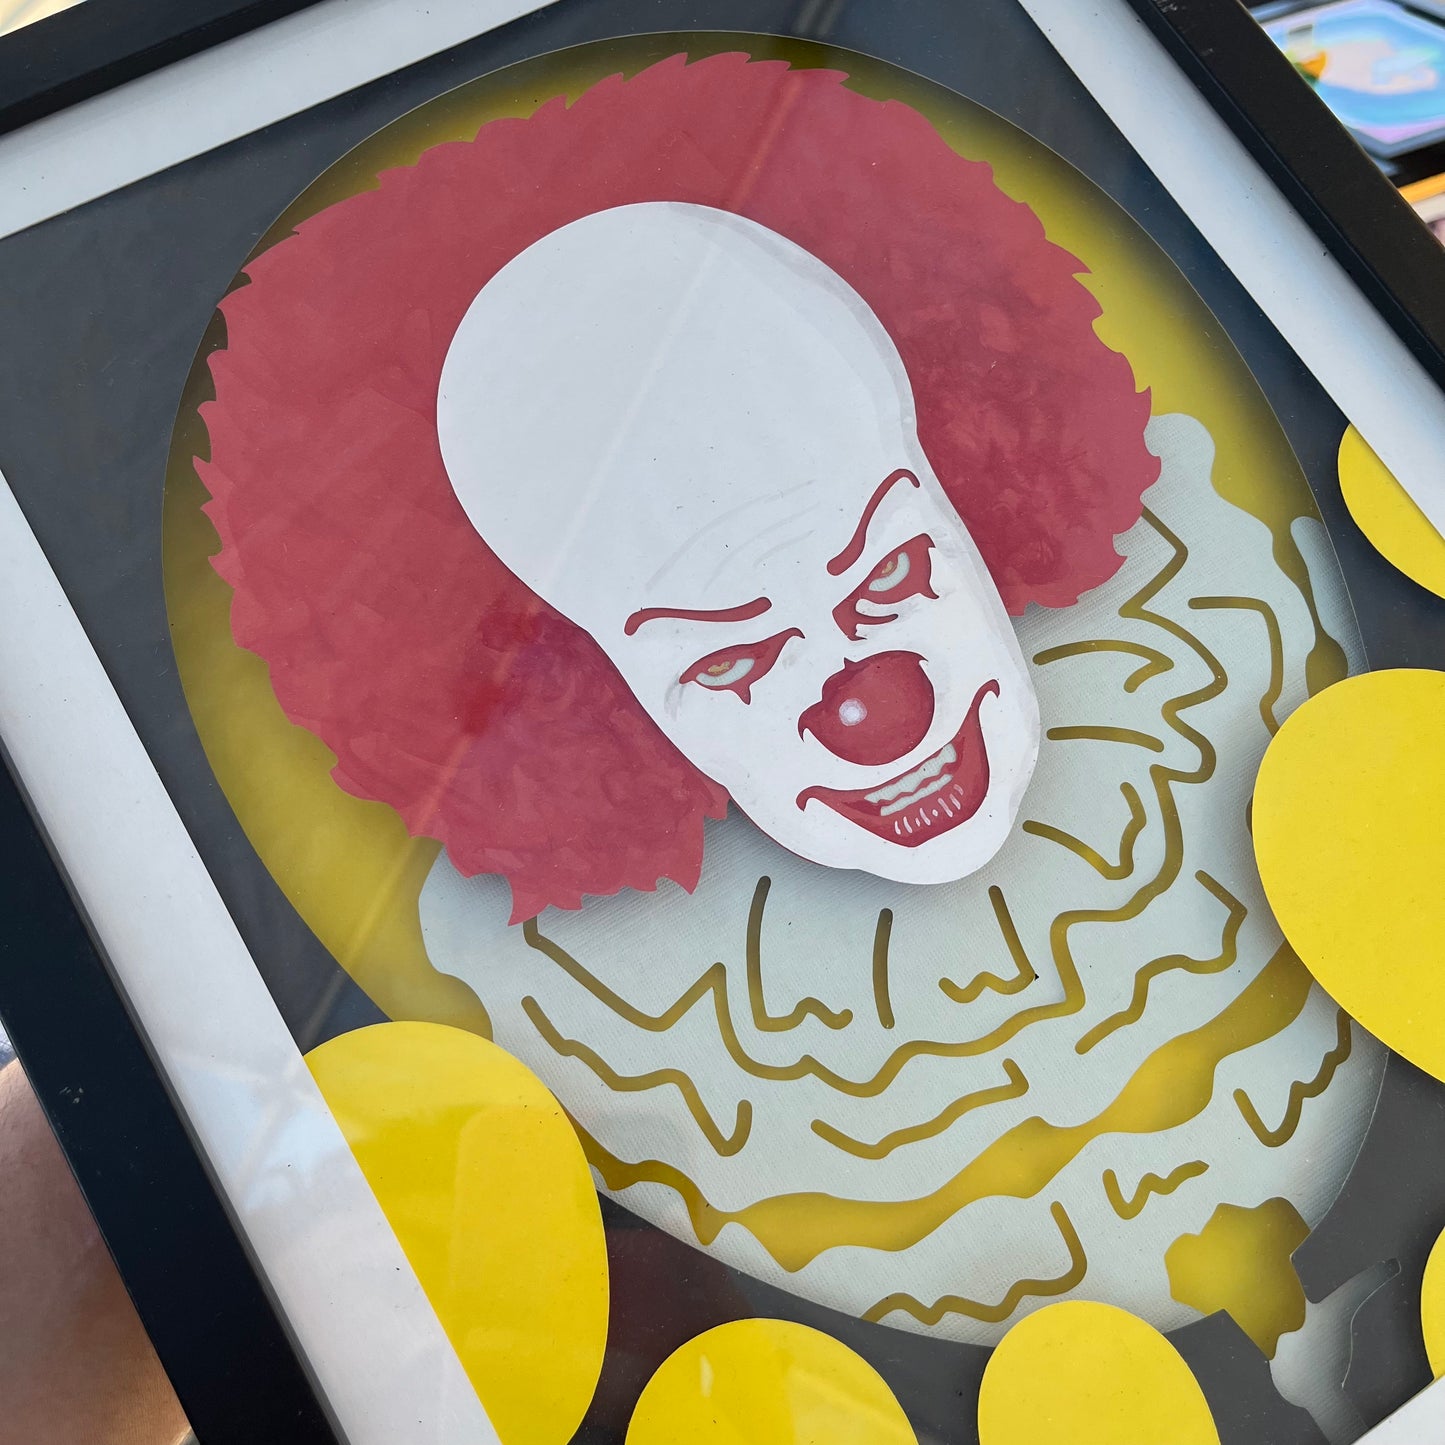 It 80s pennywise